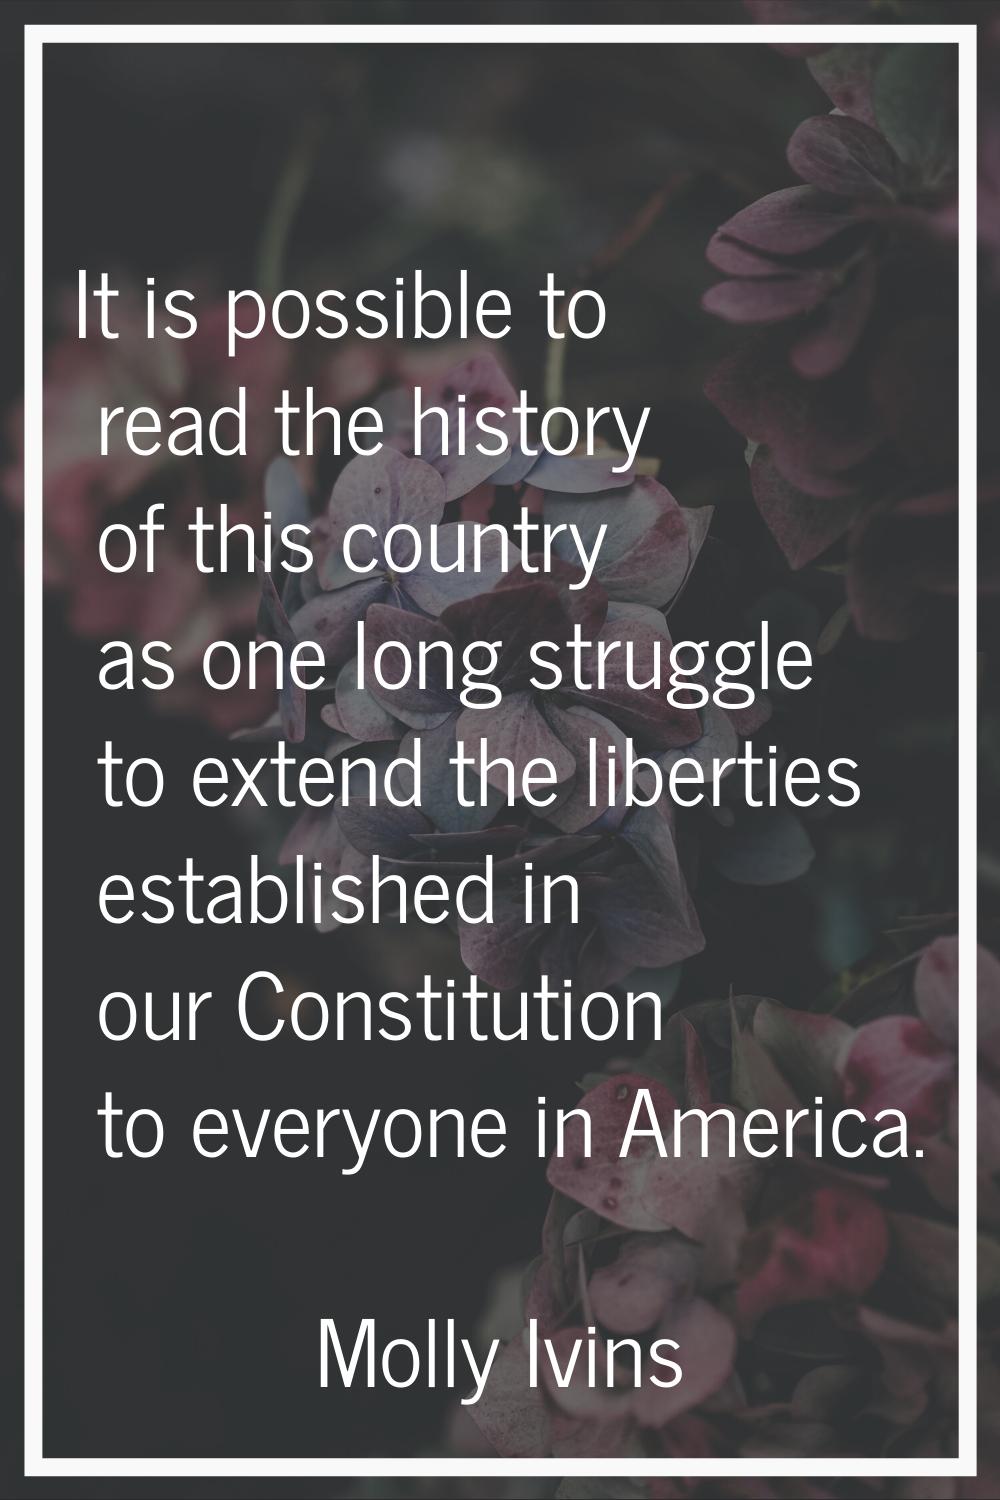 It is possible to read the history of this country as one long struggle to extend the liberties est